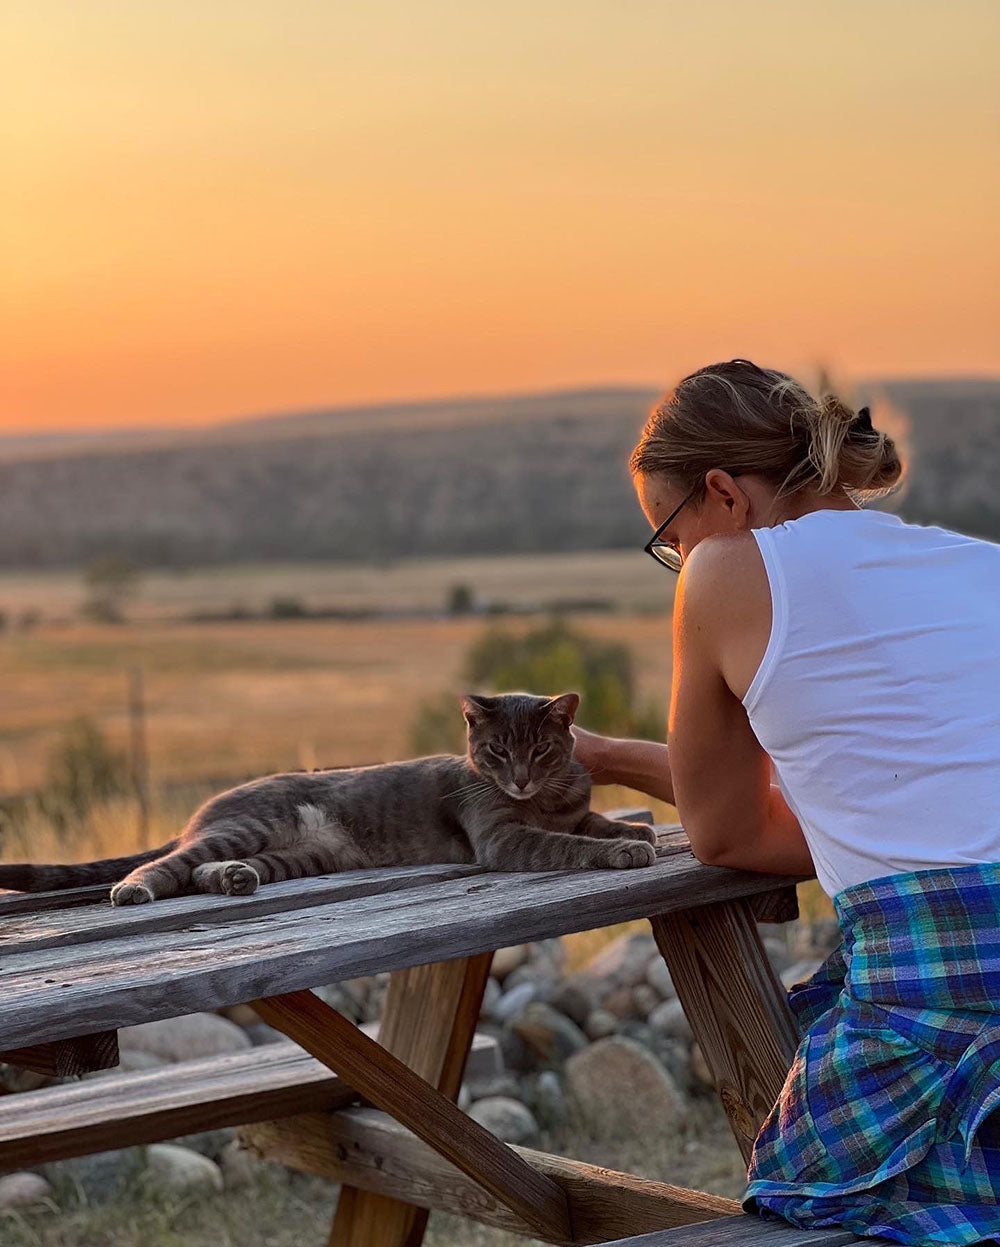 Watching the sunsetl with Otis, the barn cat, at Oniya